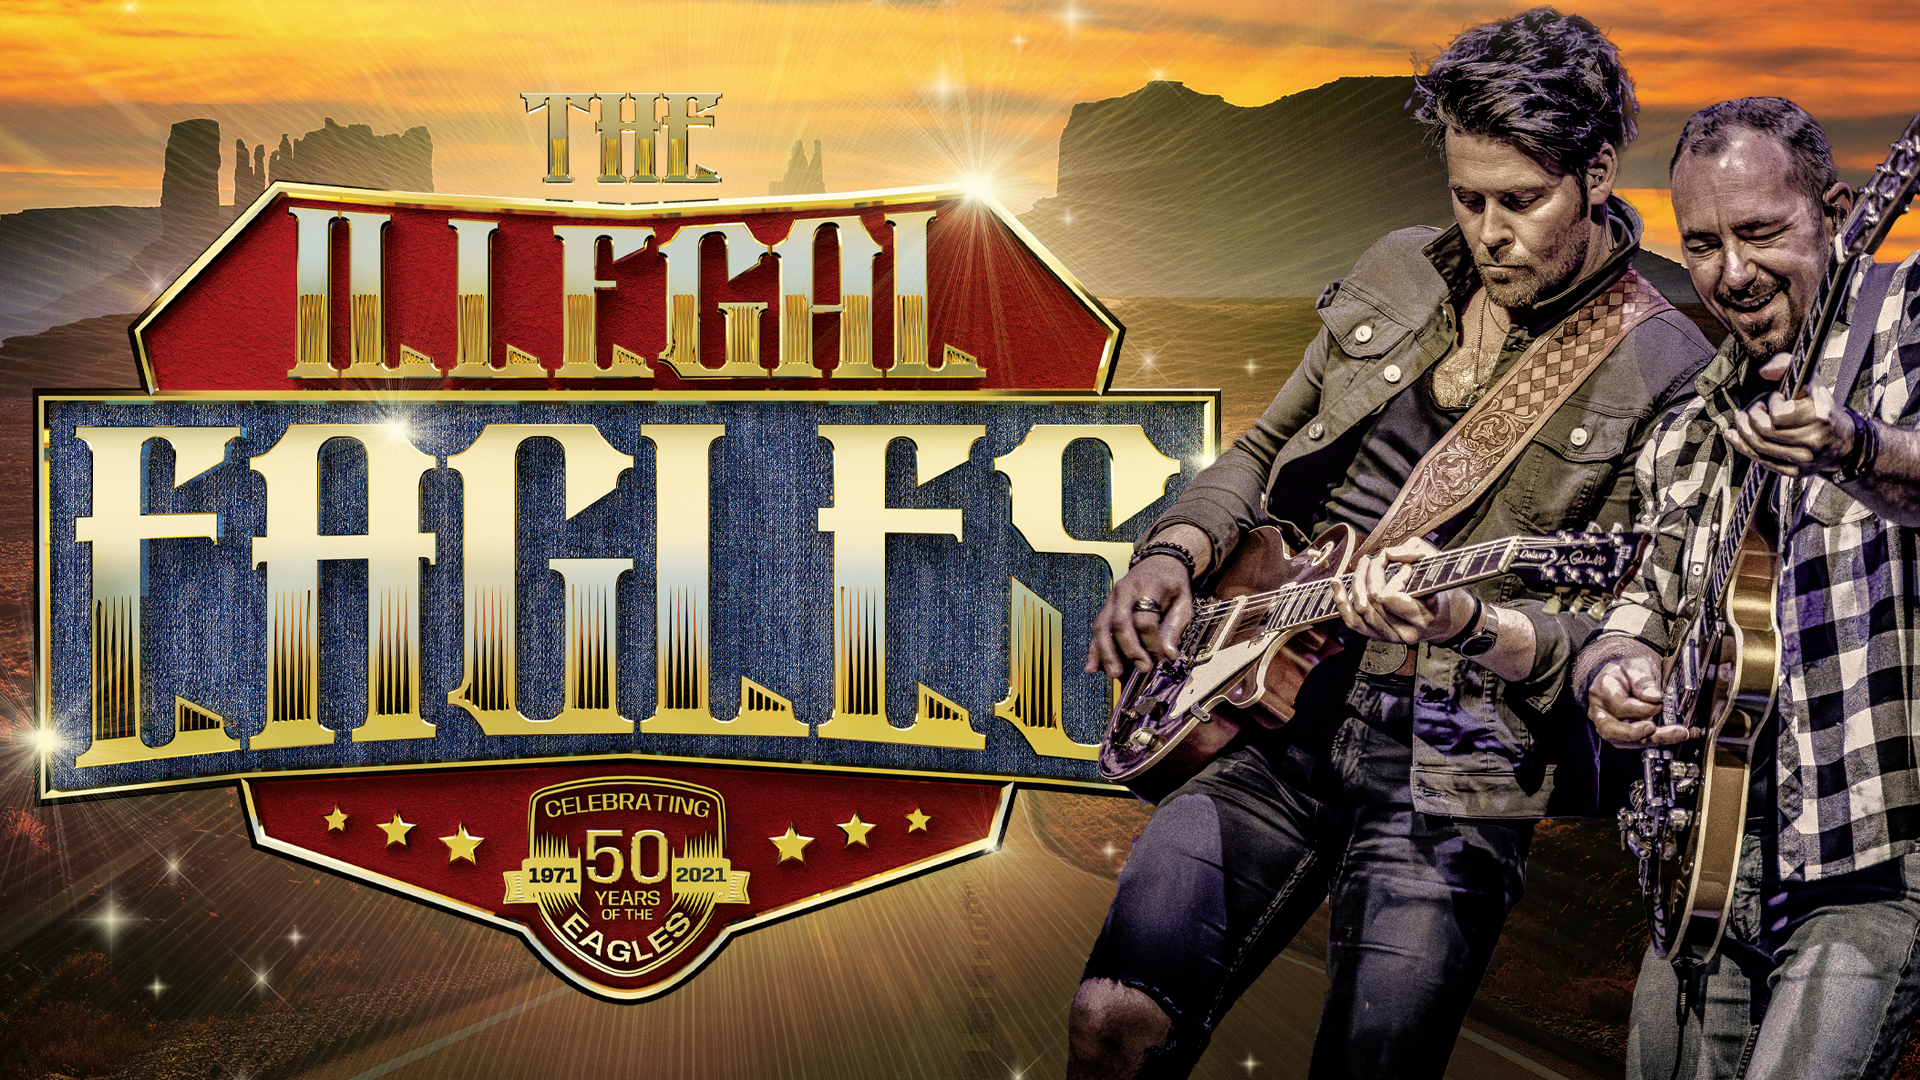 Two guitarists next to The Illagal Eagles logo 